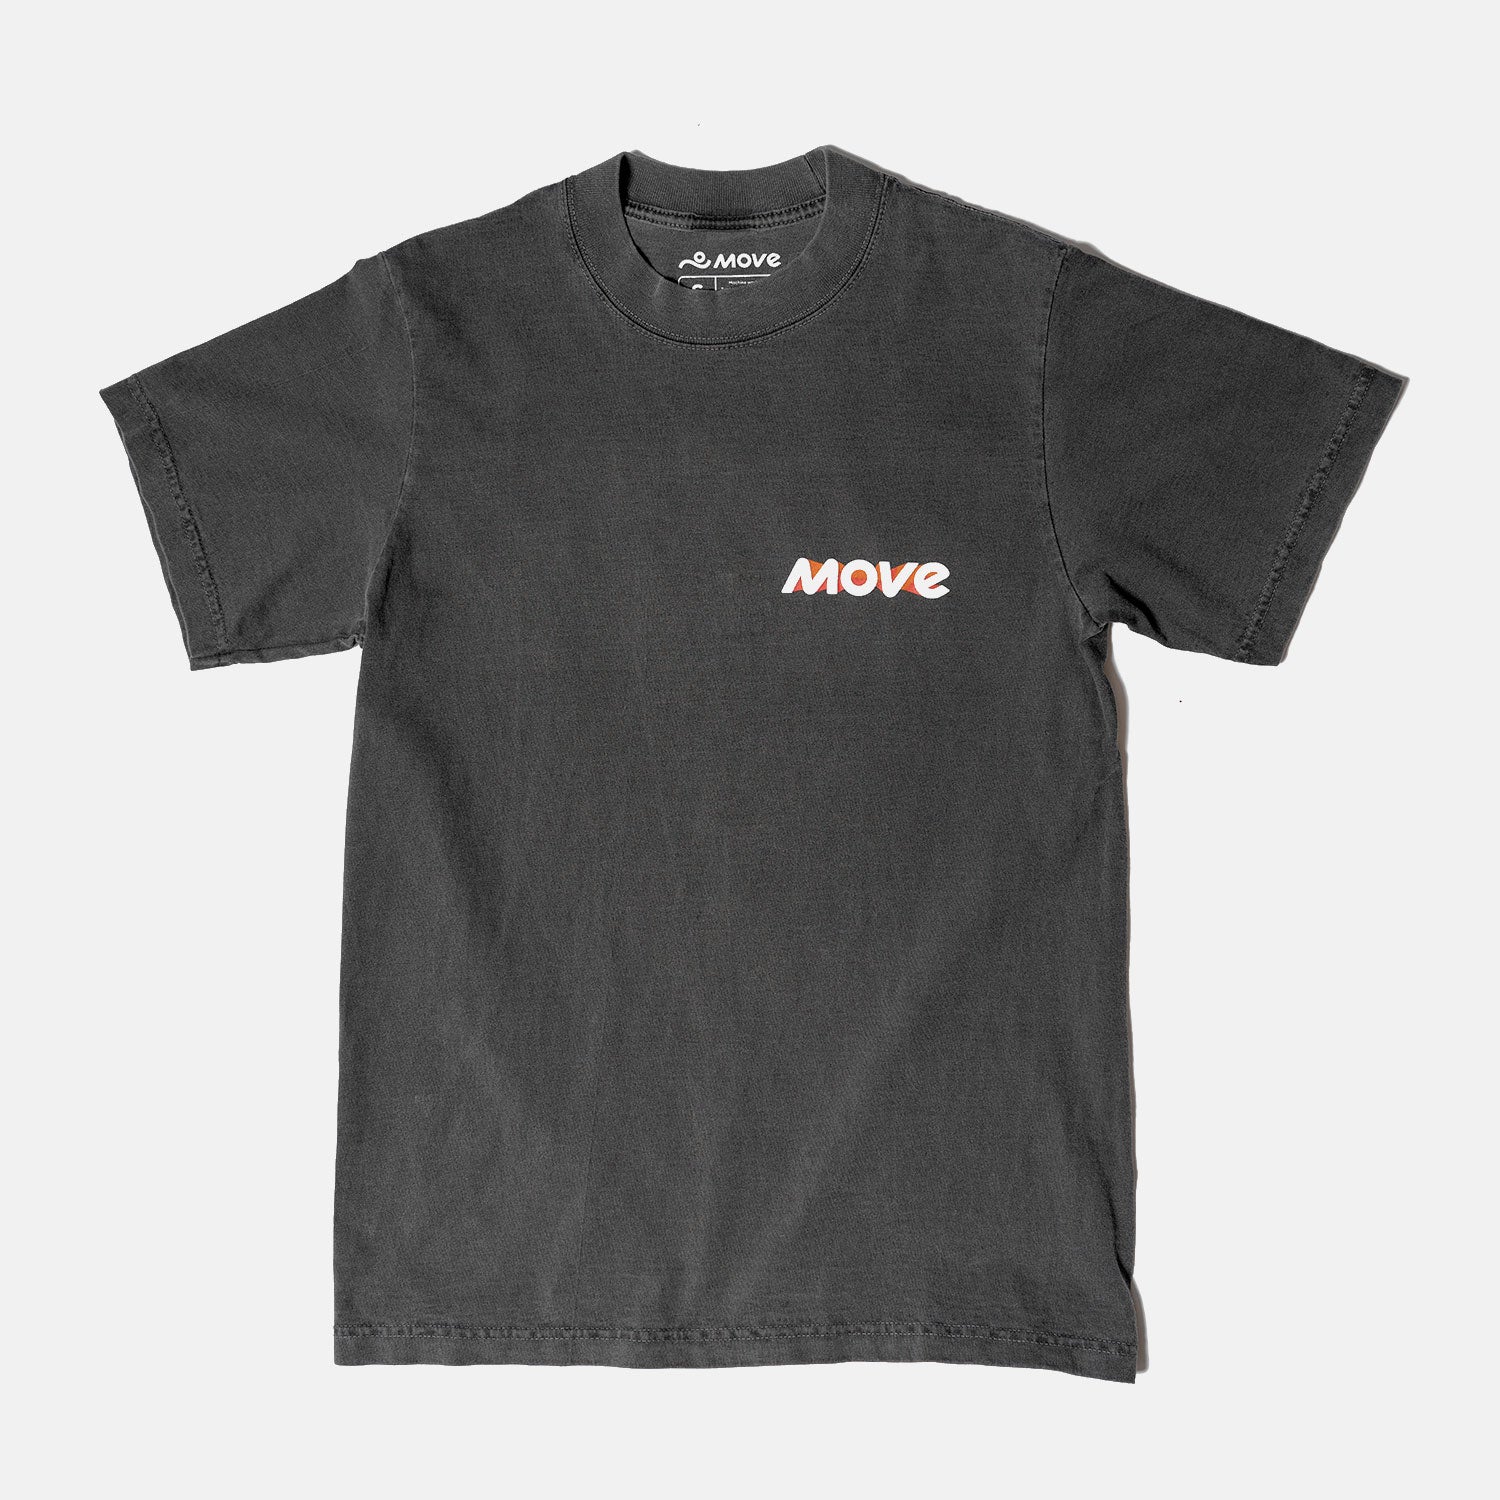 S/S Move T-Shirt